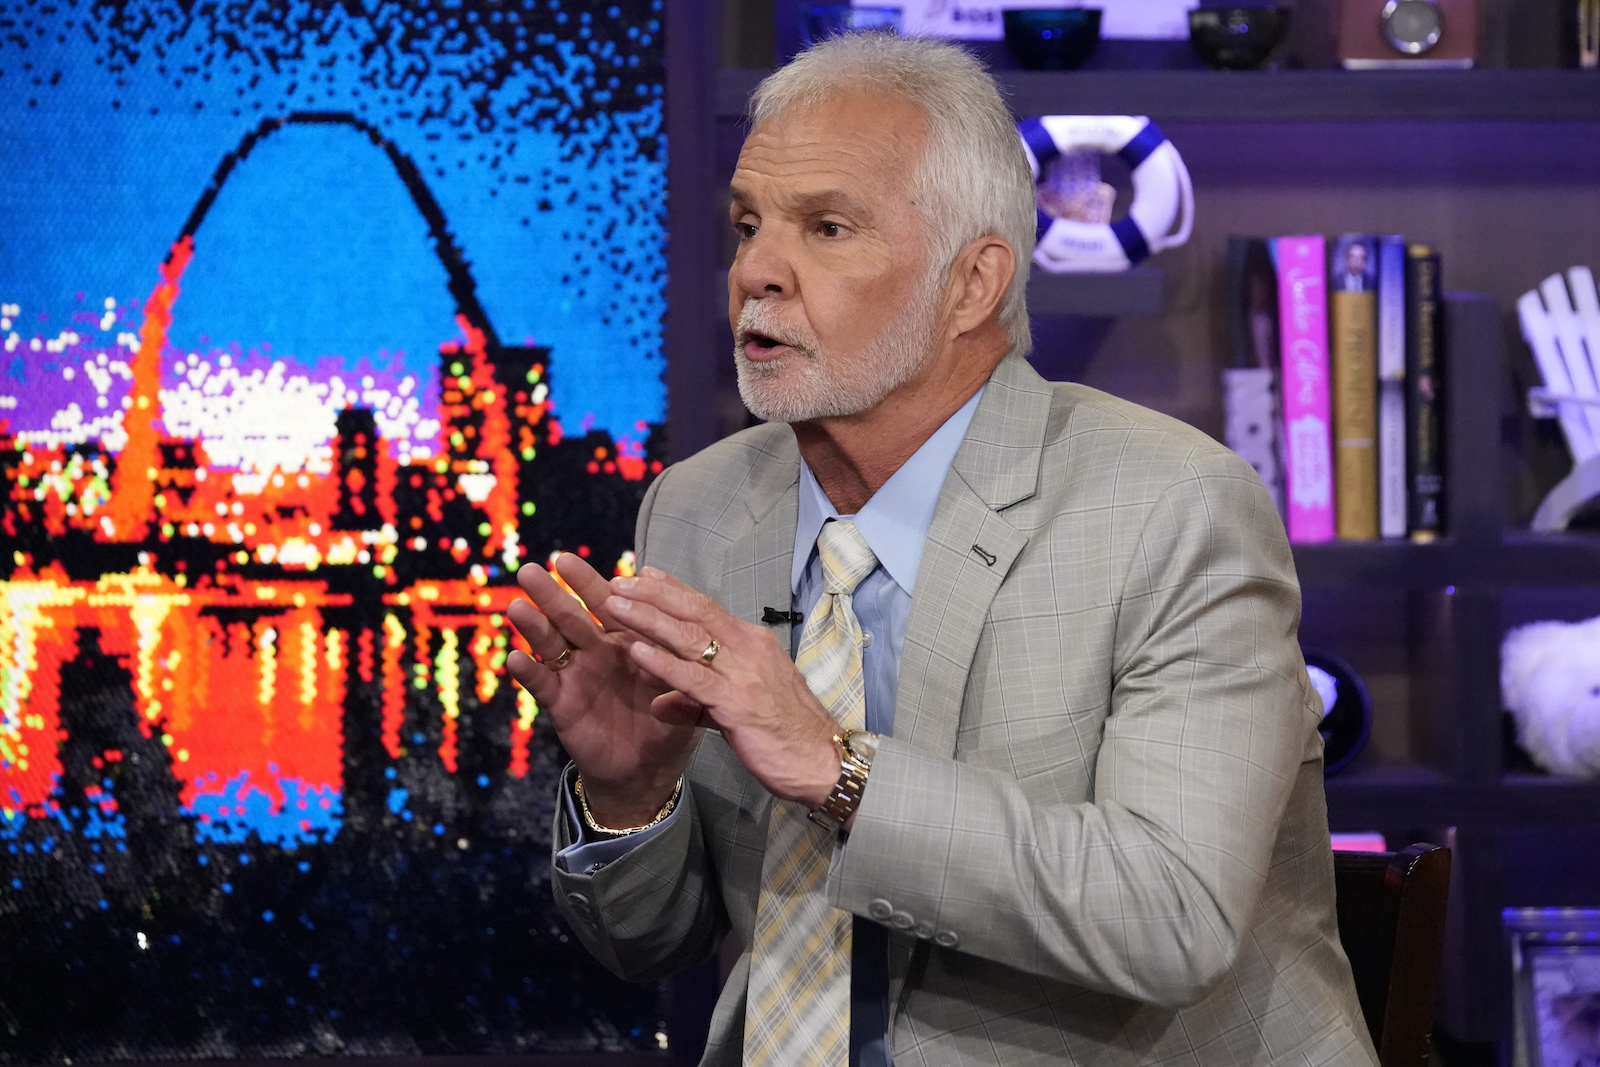 Captain Lee said he was angrier at Justin Richards than Delores Flora from Below Deck